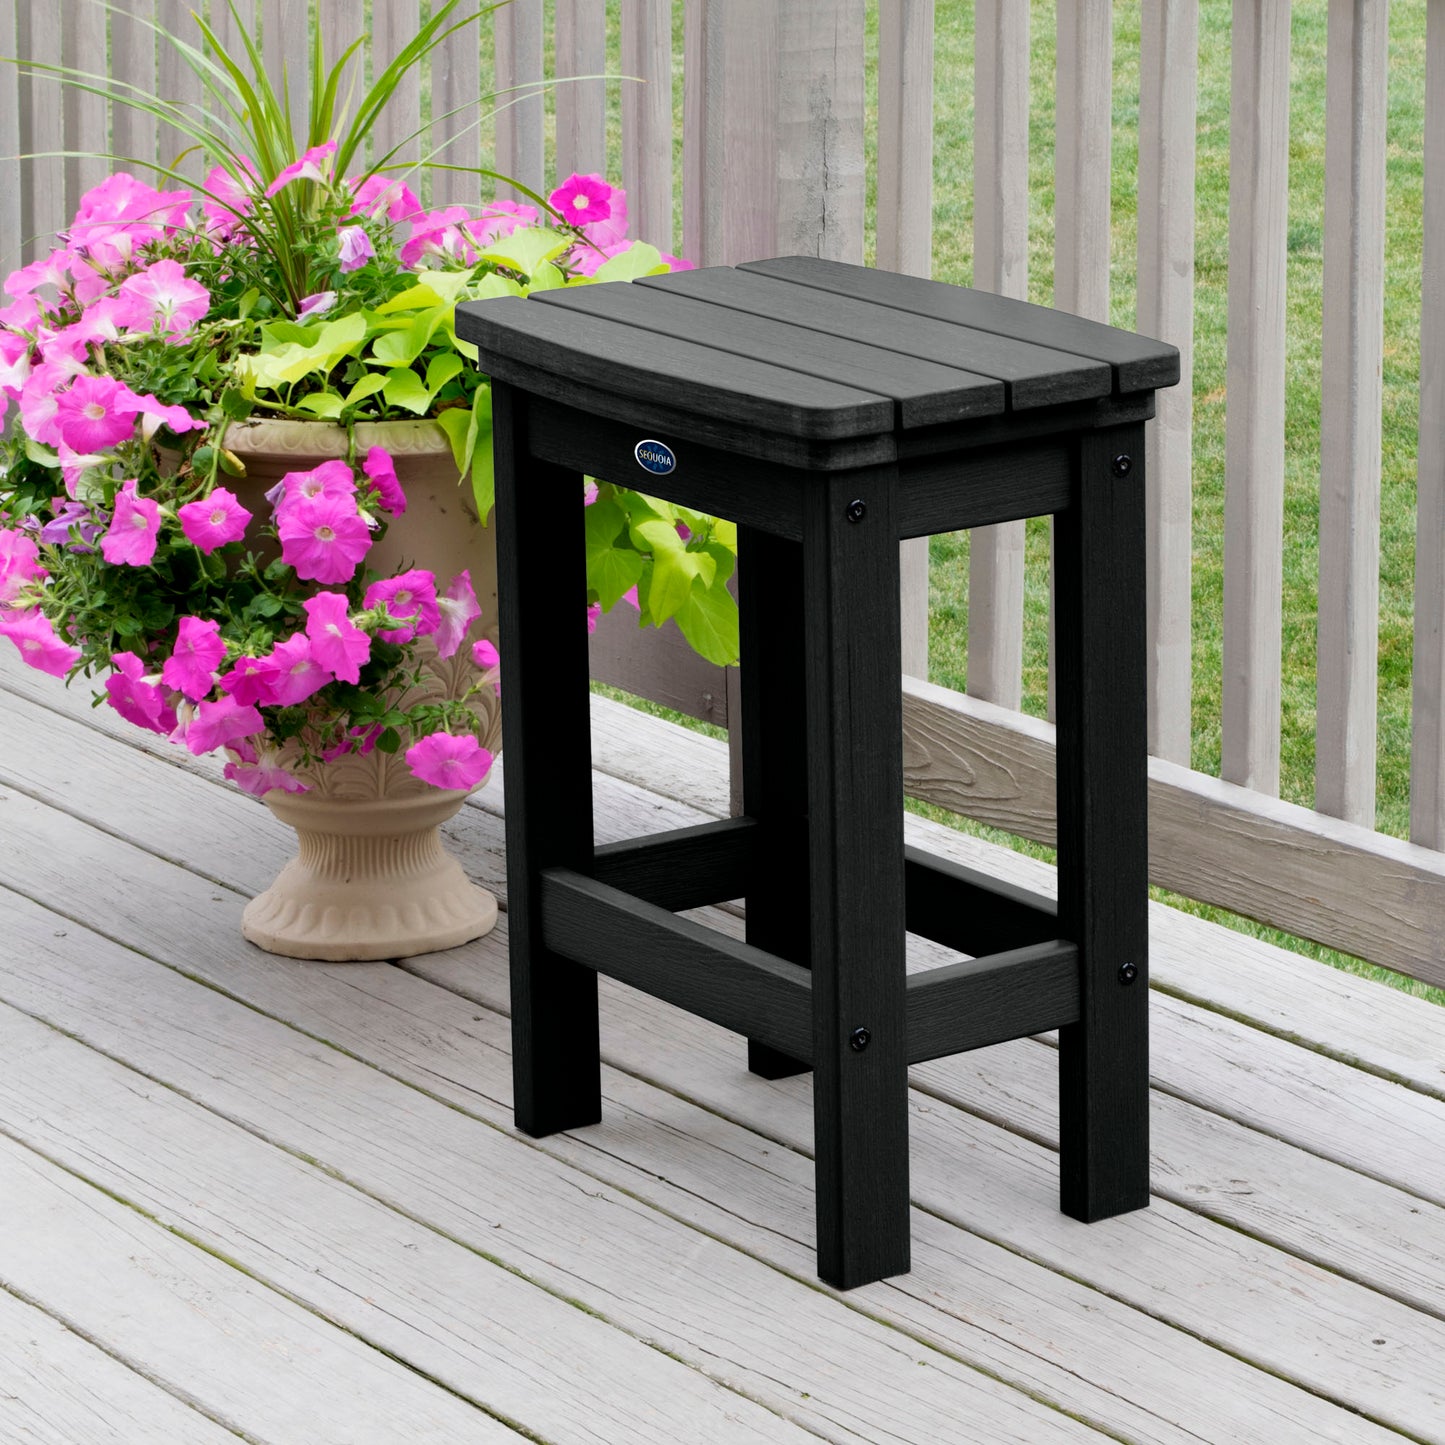 Black Blue Ridge counter height stool on tan wooden deck next to flowers